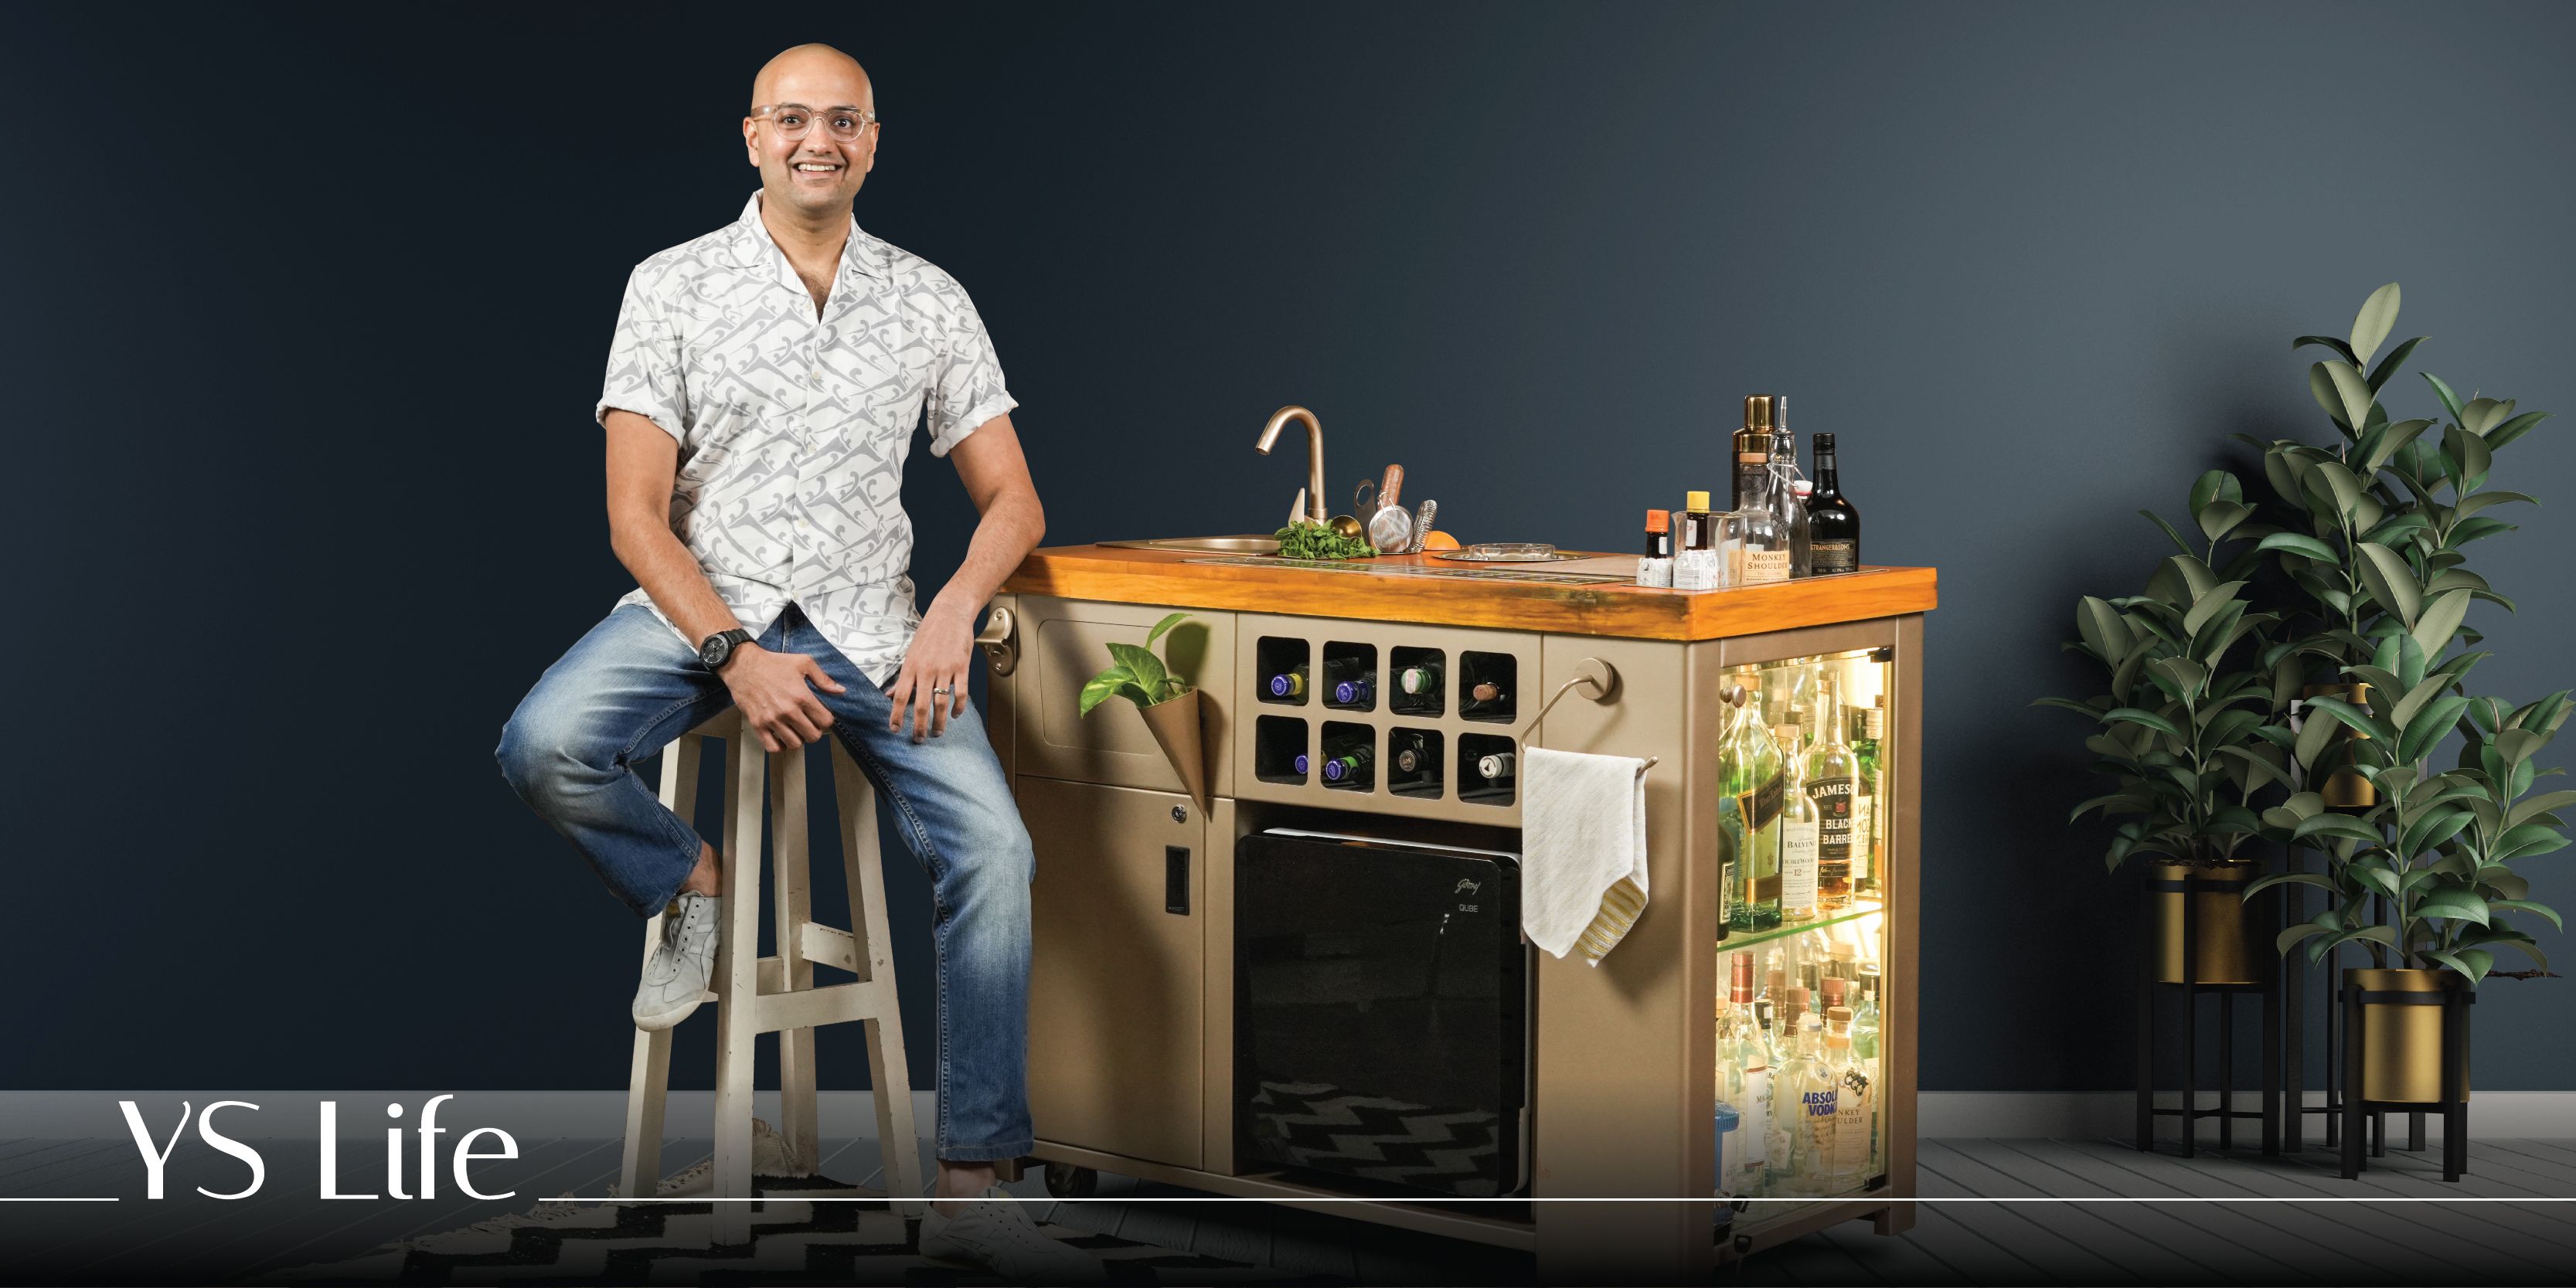 Raising the bar: Anirudh Singhal’s Haus of Bars is designing functional home bars for India